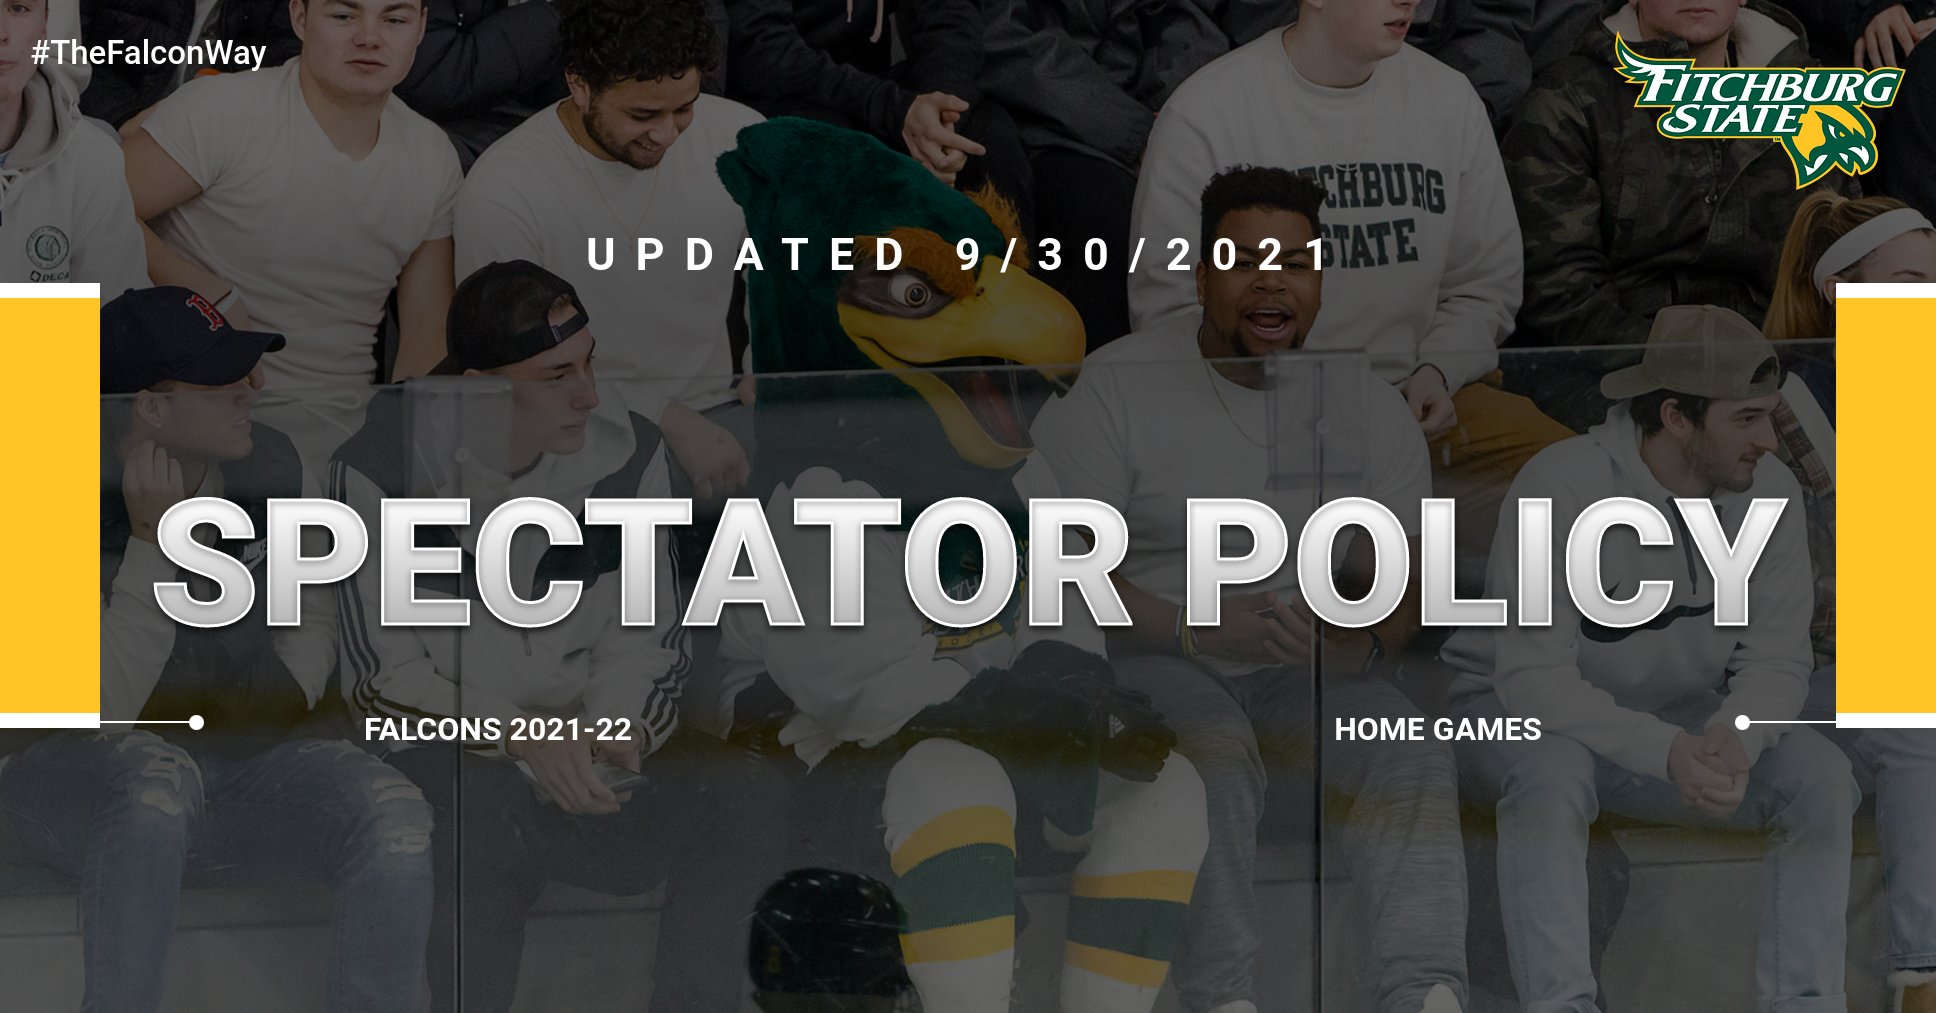 Home Game Spectator Policies - UPDATED 9/30/21